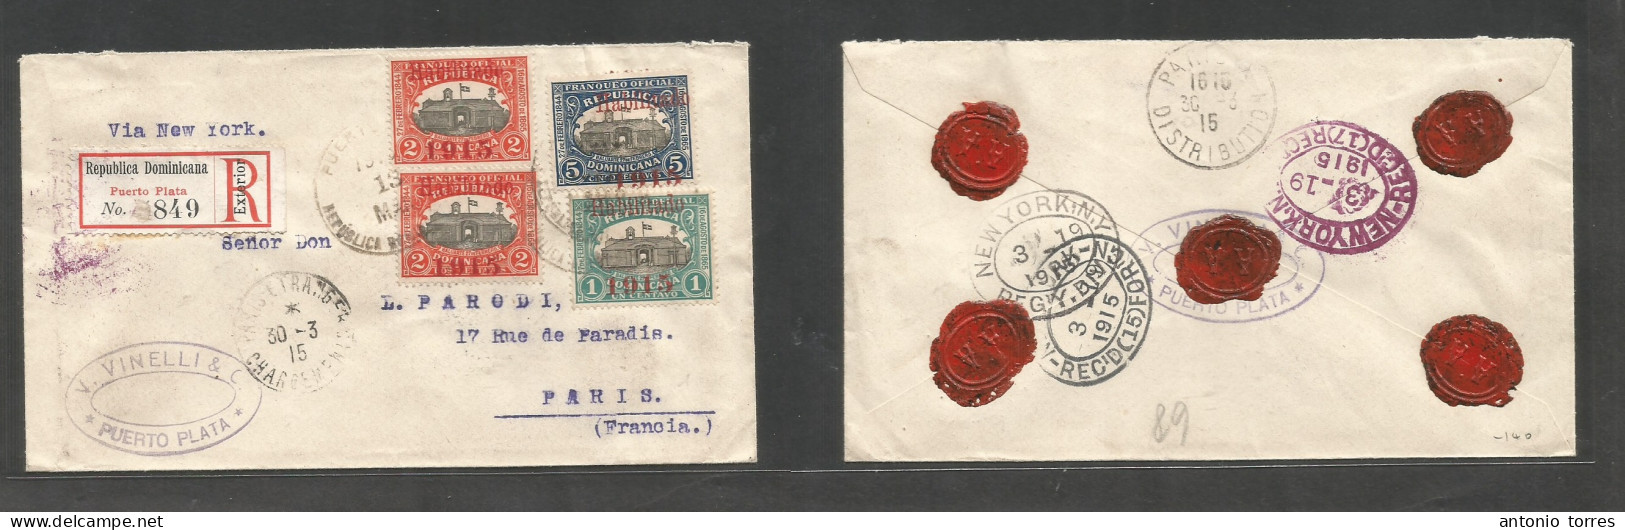 Dominican Rep. 1915 (13 March) 1915 Ovptd Issue. Puerto Plata - France, Paris (30 March) Registered Multifkd Env Via NYC - Dominican Republic